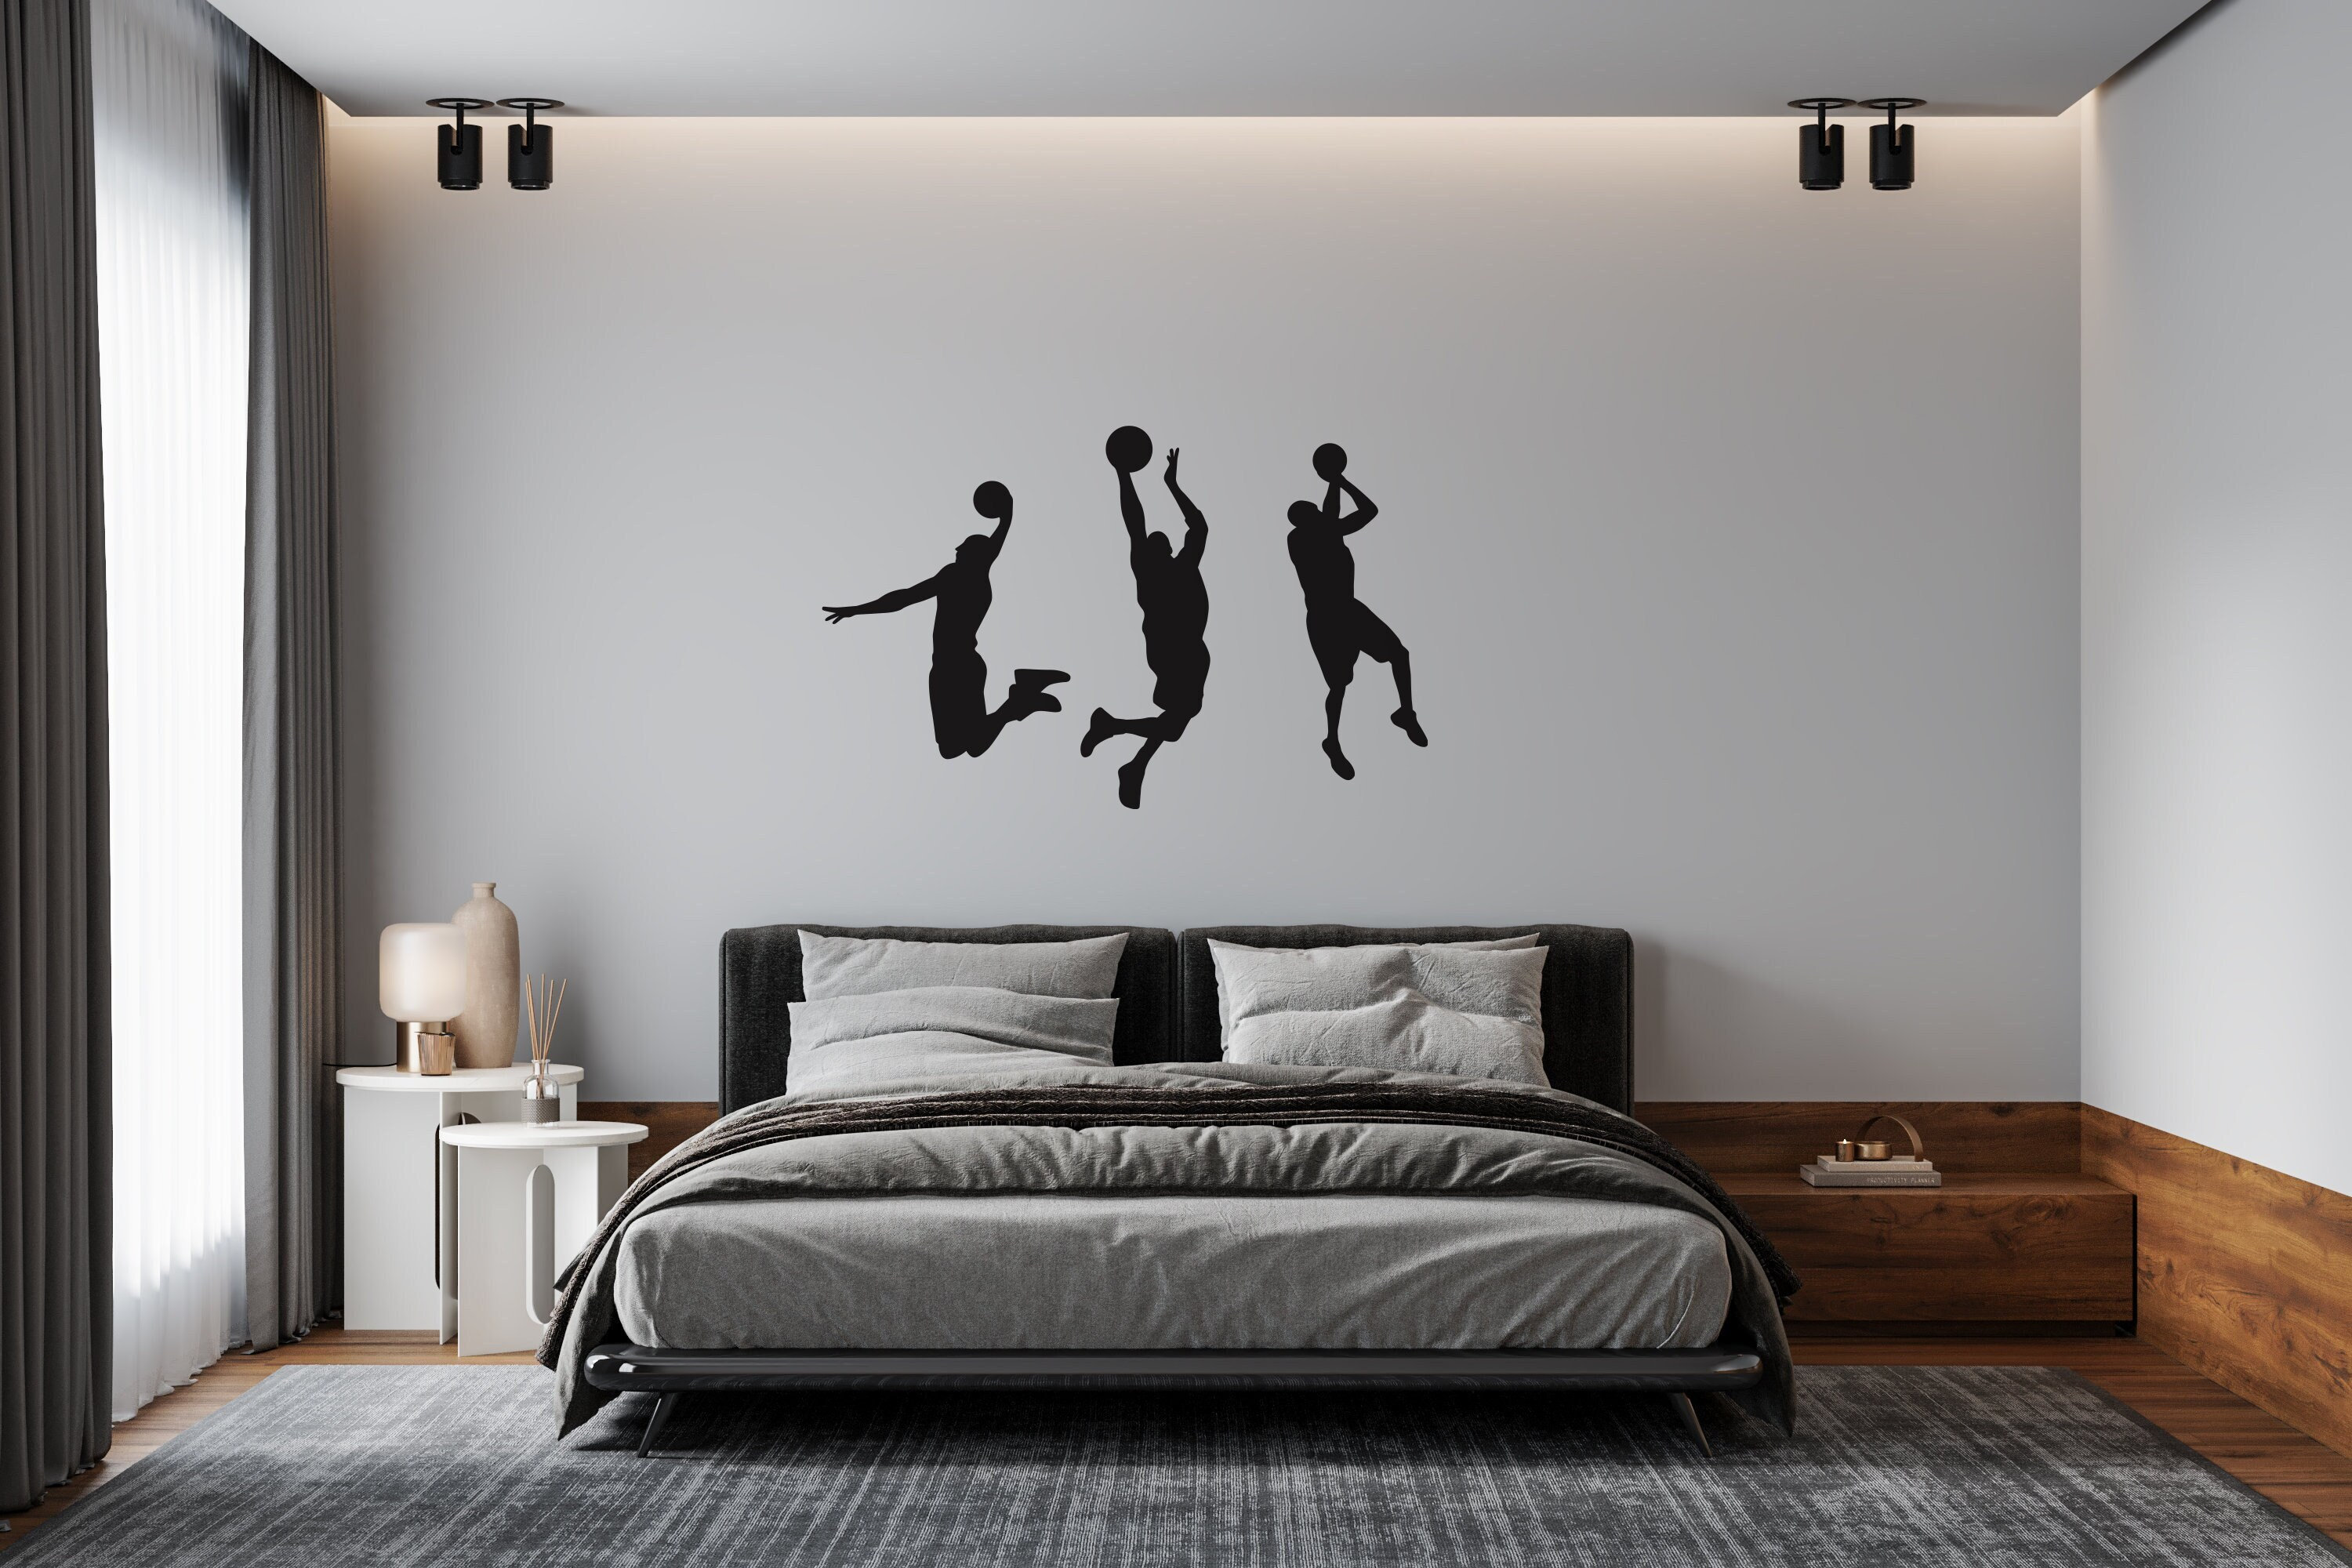 Charlotte Hornets: Miles Bridges 2021 - NBA Removable Adhesive Wall Decal Life-Size Athlete +13 Wall Decals 40W x 78H